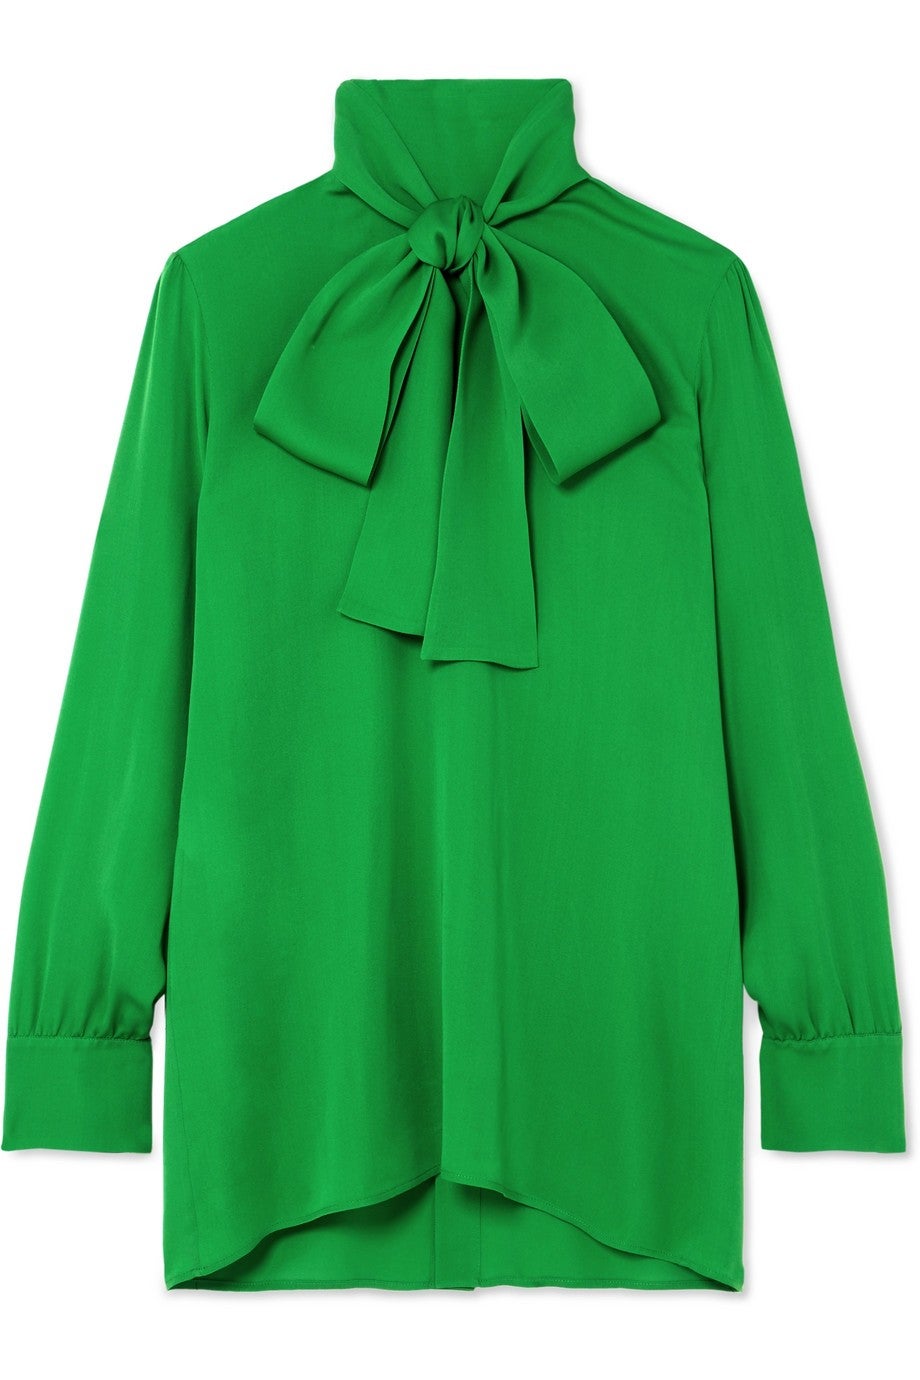 Gucci green bow blouse